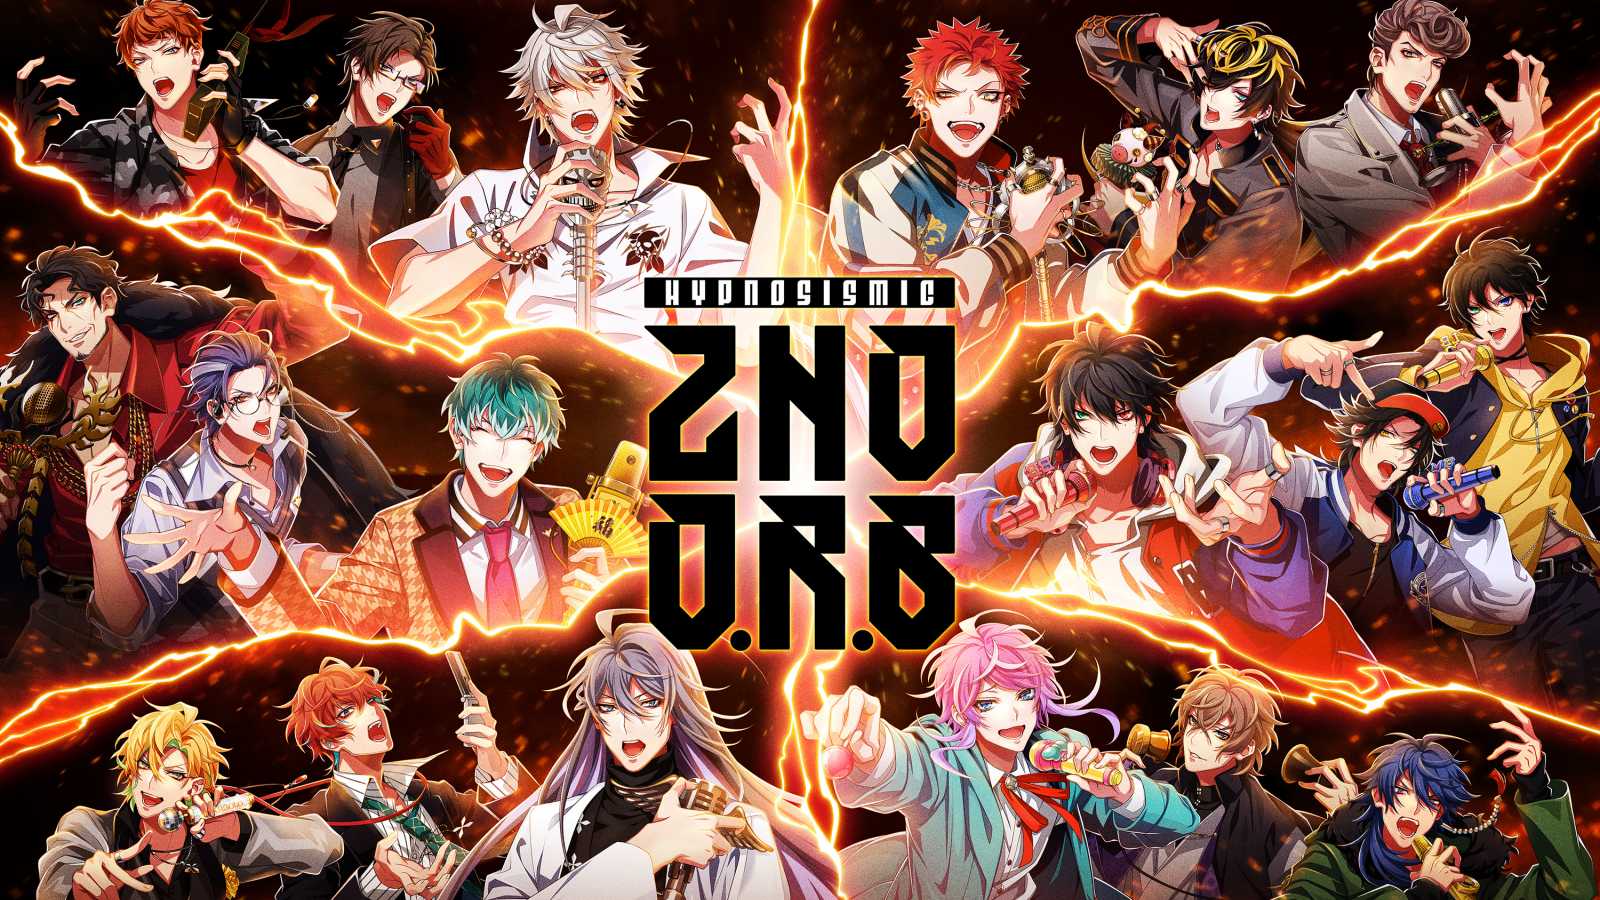 Hypnosis Mic zapowiada trzy wydawnictwa w ramach "2nd Division Rap Battle" © EVIL LINE RECORDS. All rights reserved.